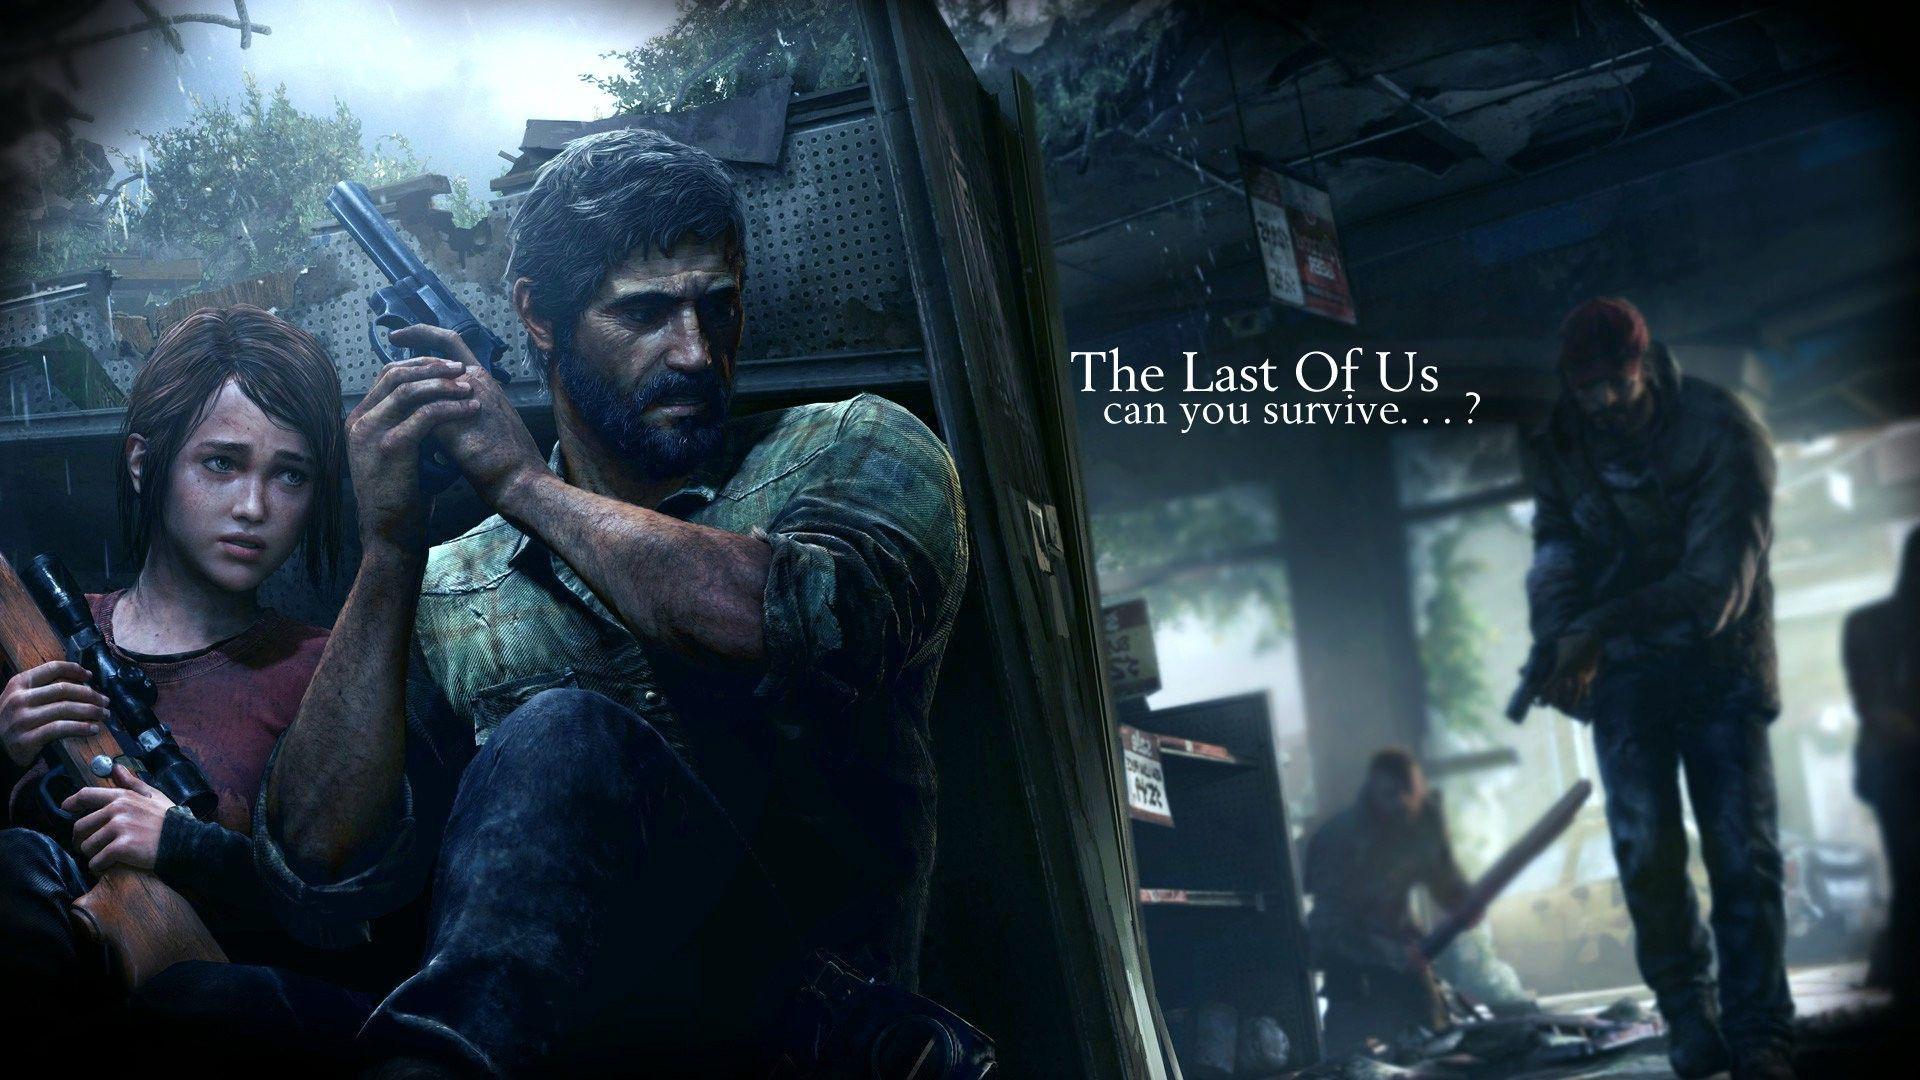 140+ The Last of Us Part II HD Wallpapers and Backgrounds